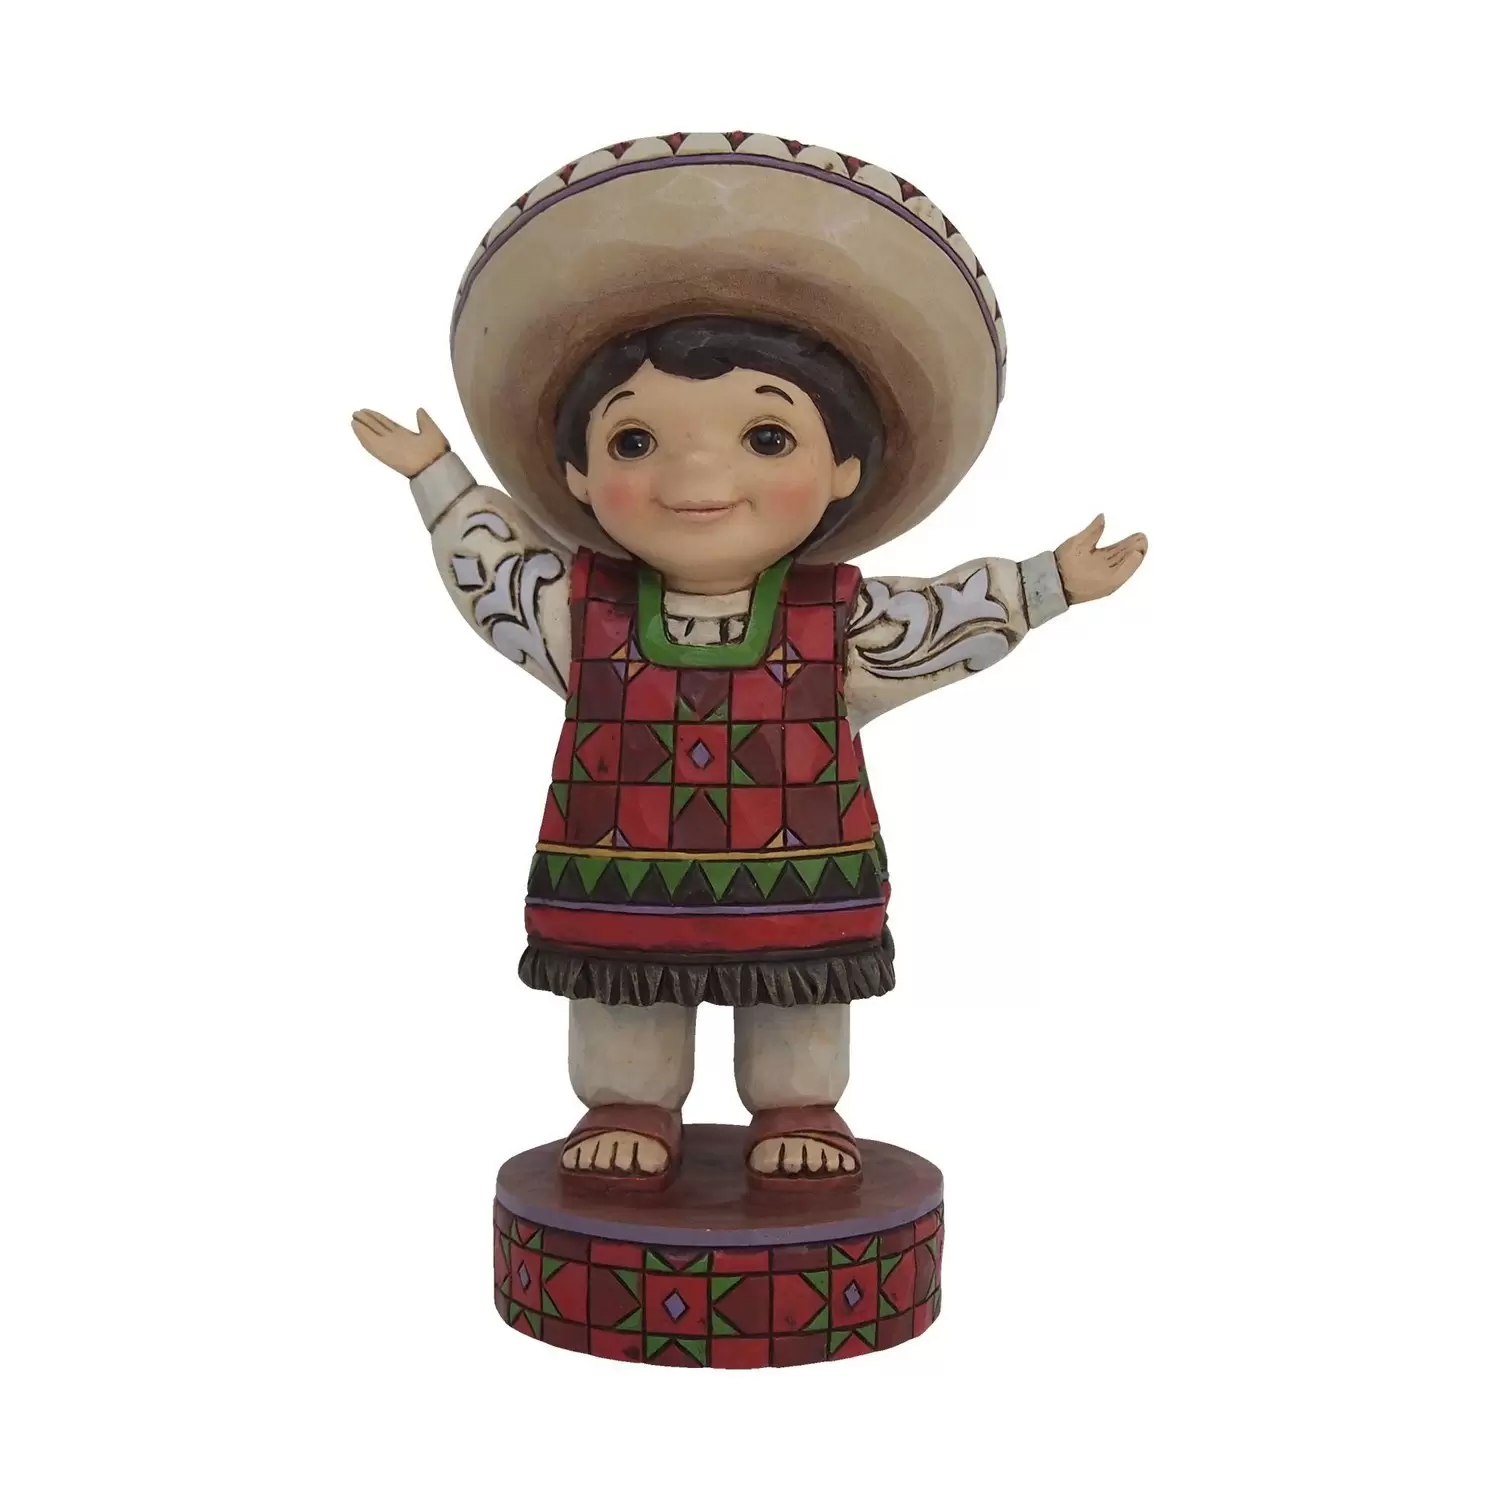 Disney Traditions by Jim Shore - Welcome to Mexico - Small World Mexico